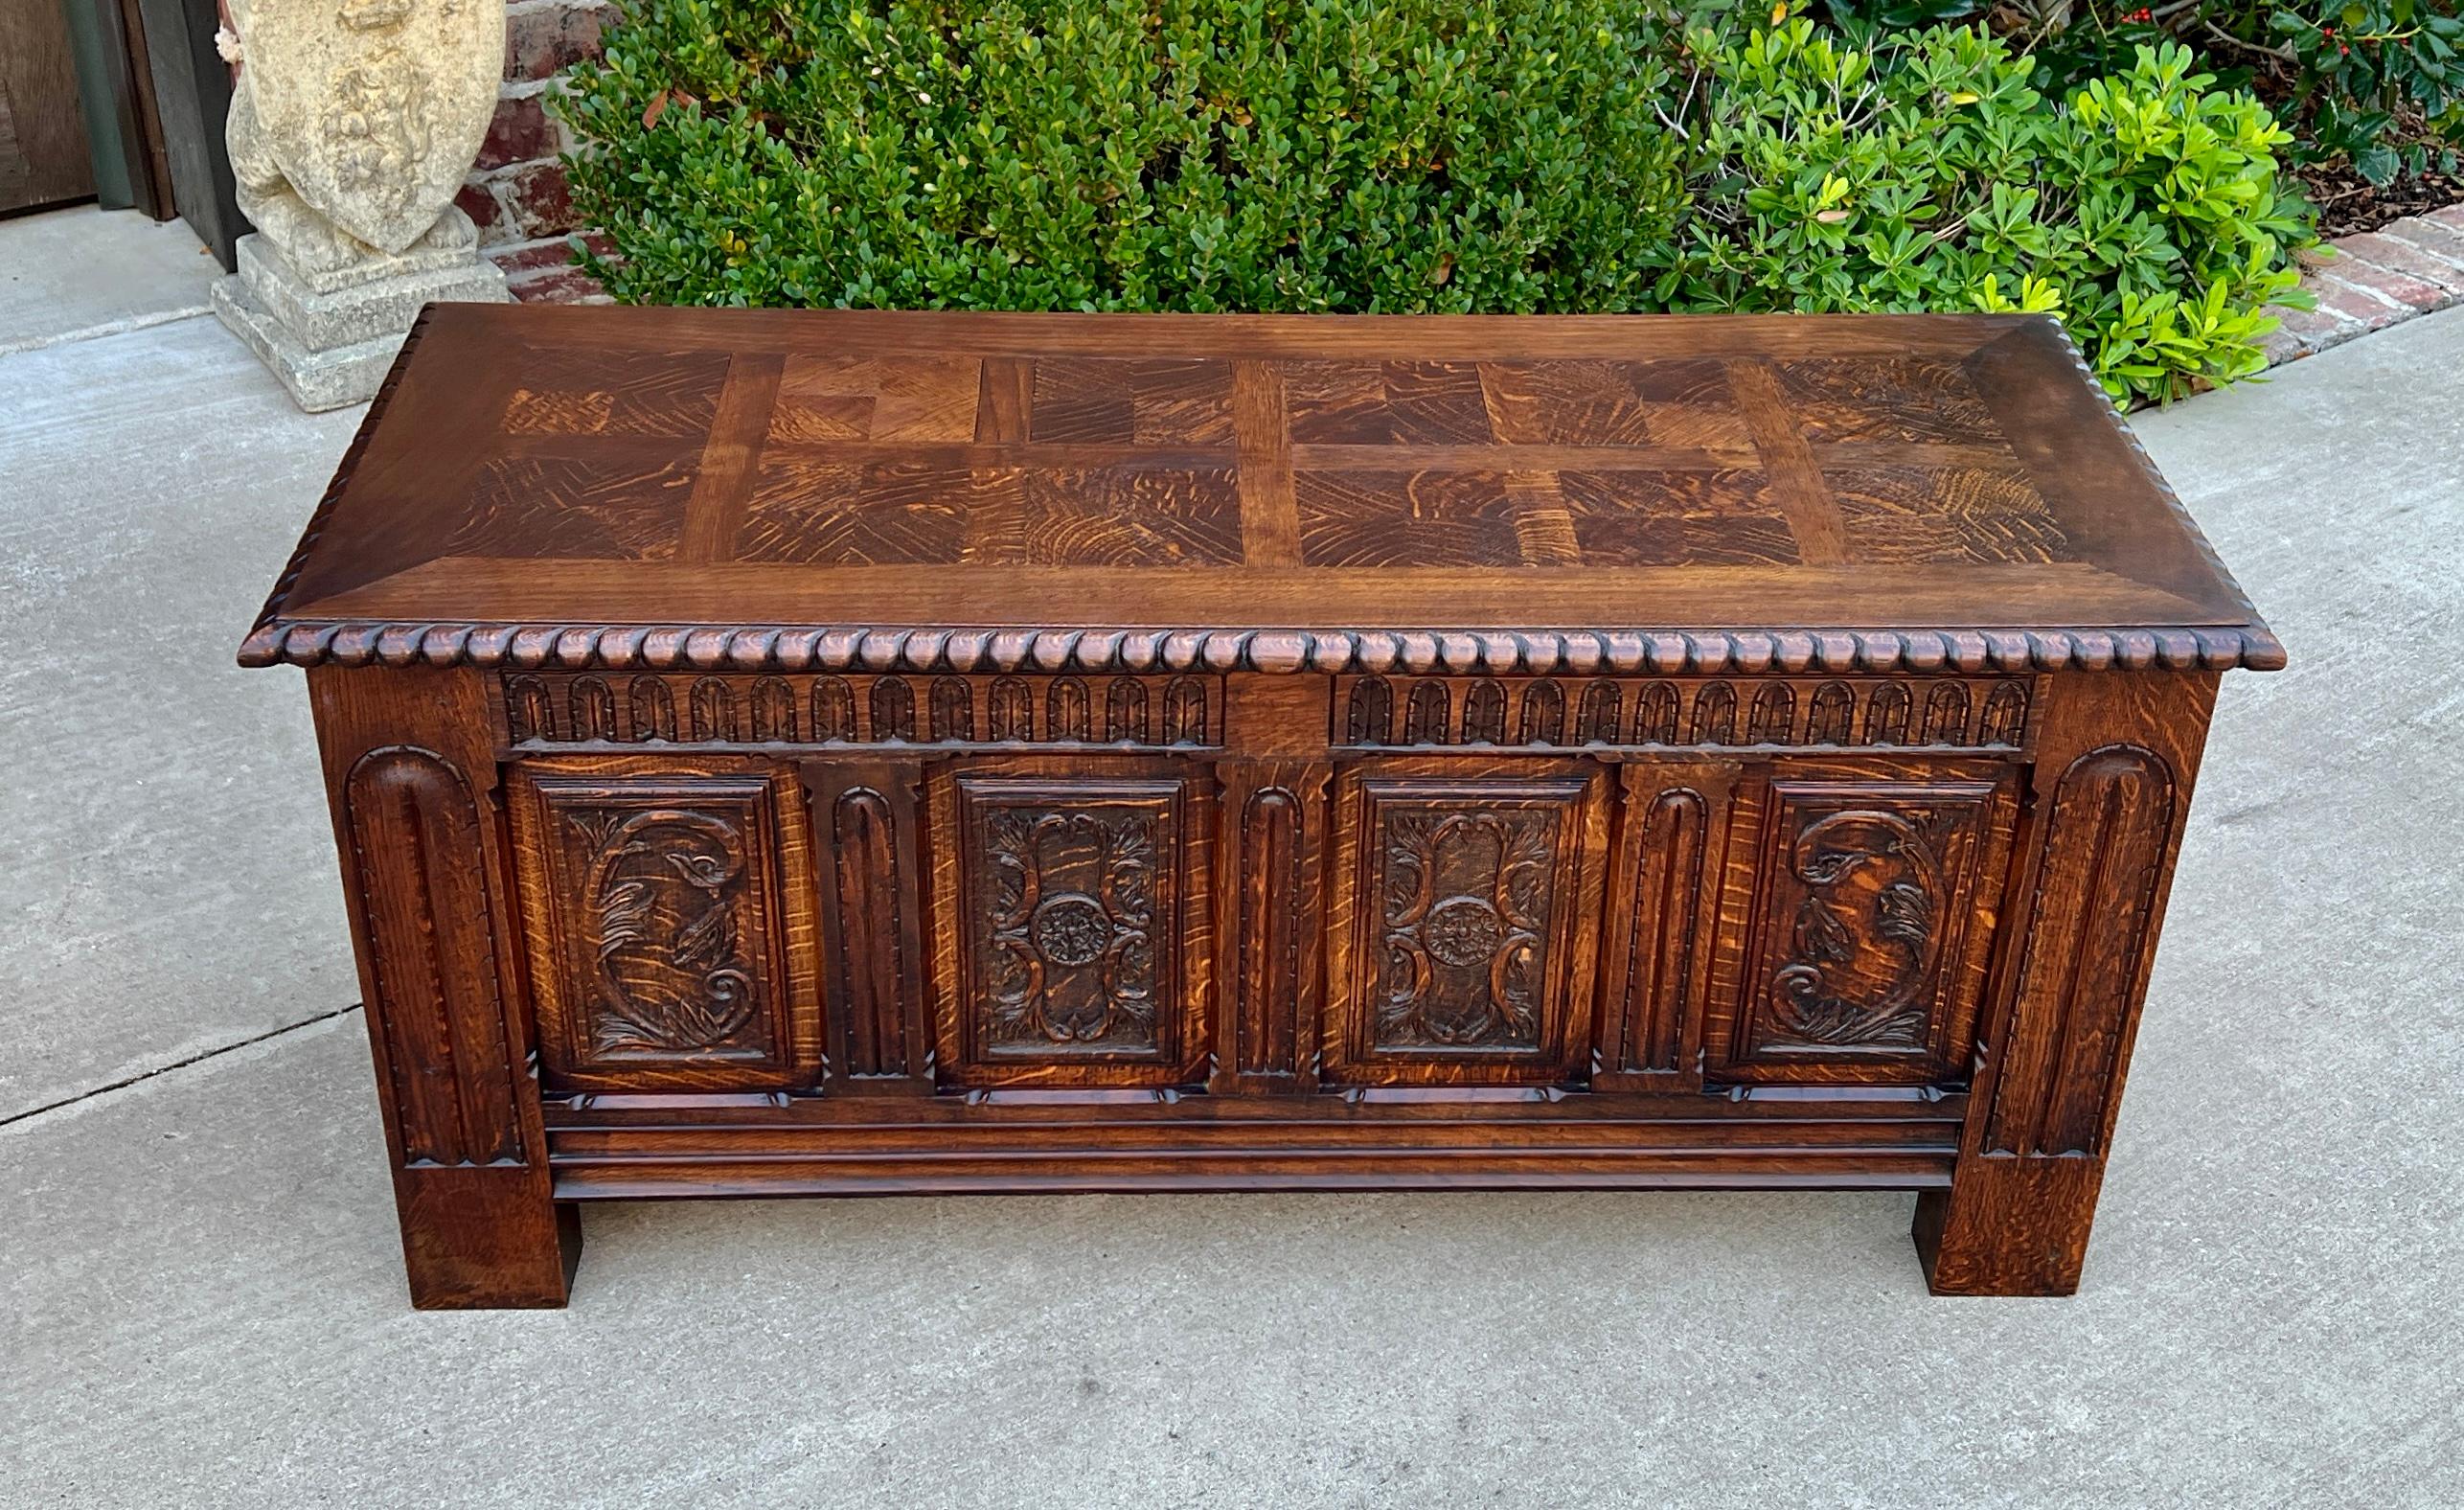 CHARMING Antique French Carved Oak Blanket Box, Coffer, Trunk, Storage Chest, Coffee Table or Bench~~c. 1920-30s

  The perfect size for a foyer, entry hall or mudroom bench, or as a coffee table.  Excellent example of the hand carved craftsmanship